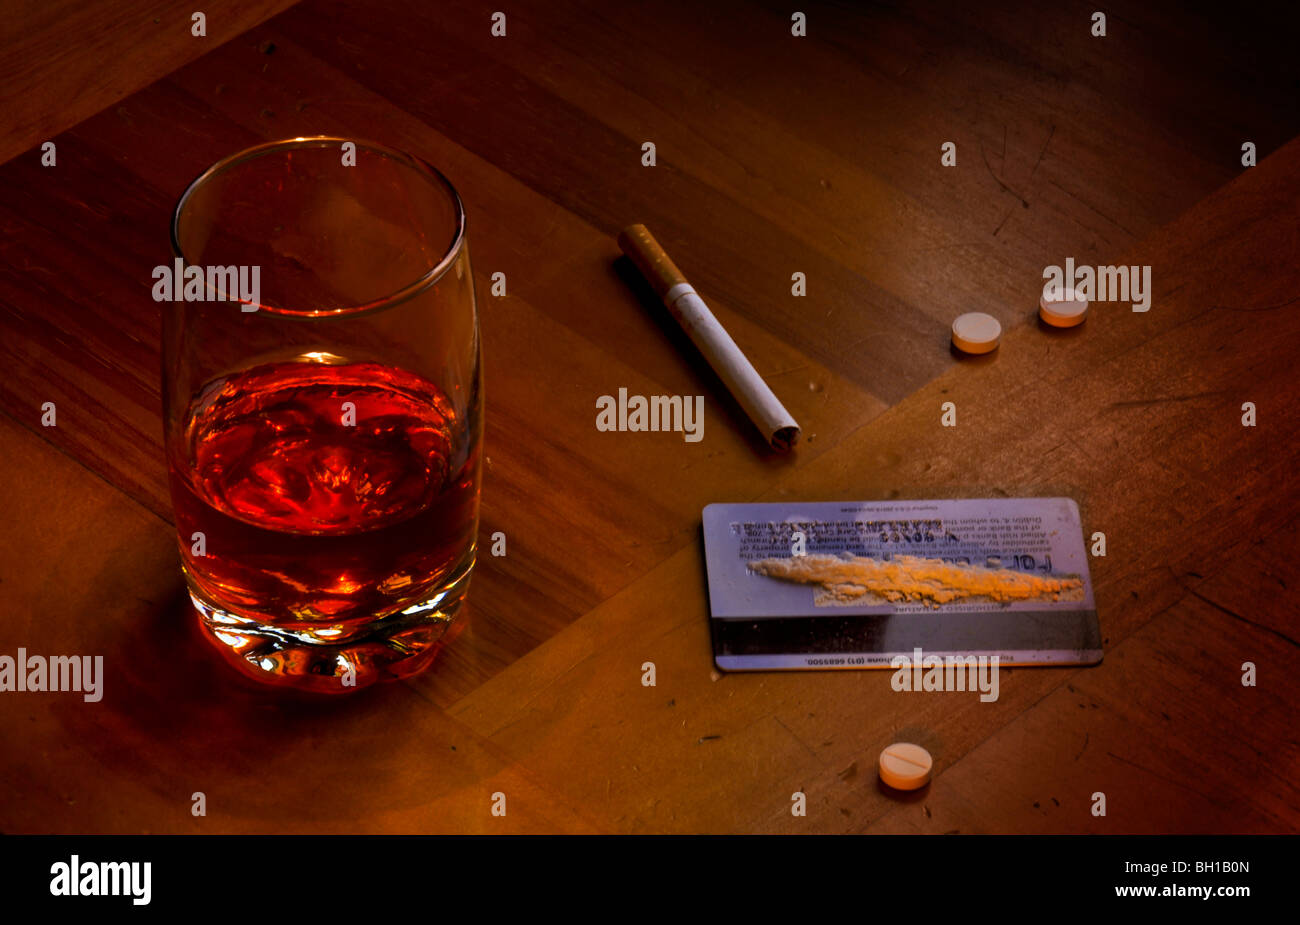 Conceptual image showing alcohol, tobacco, drugs habits or addiction. Stock Photo